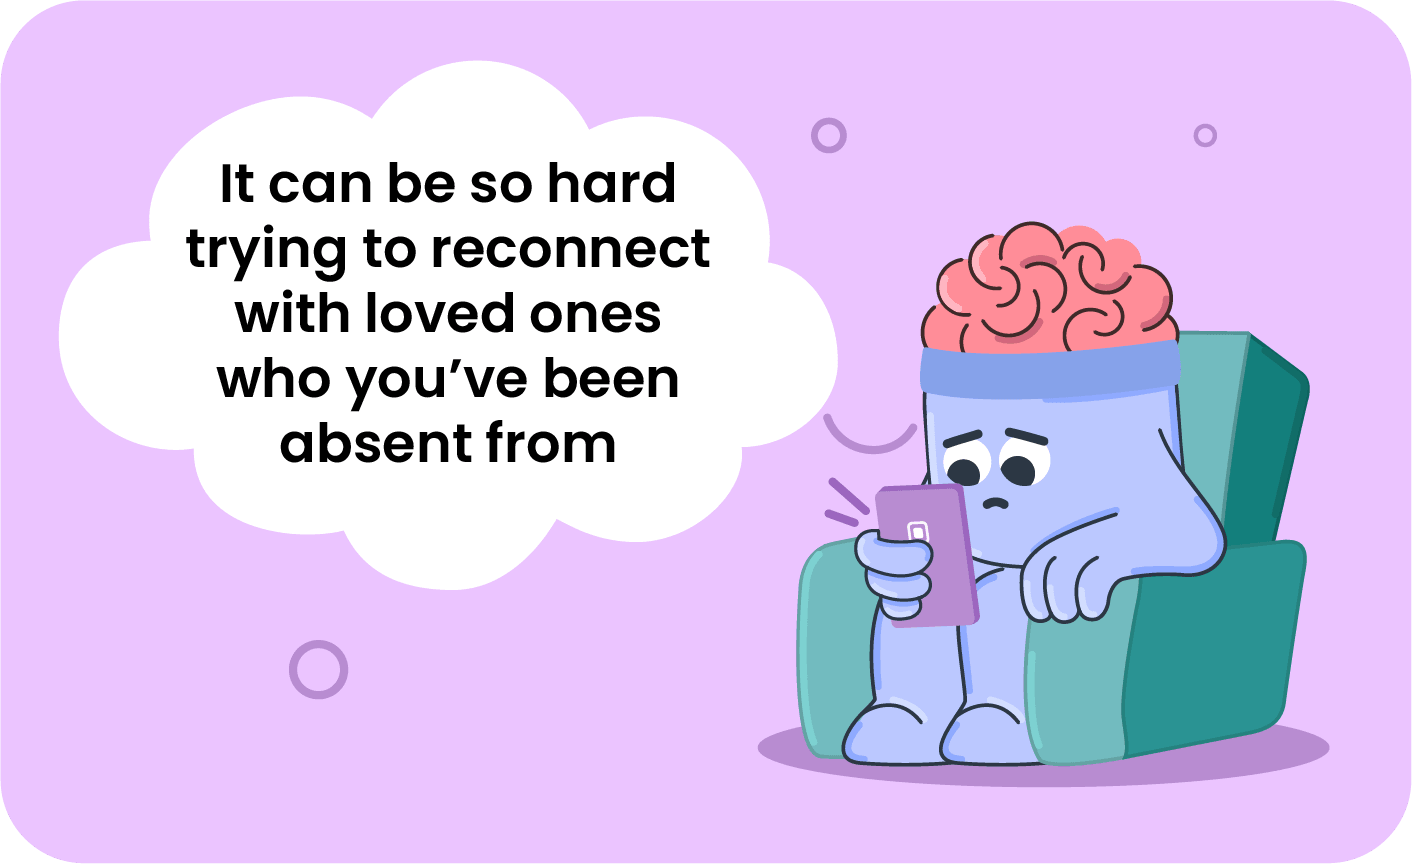 People Describe The Hardest Parts Of Coming Out Of A Depressive Episode - The Depression Project